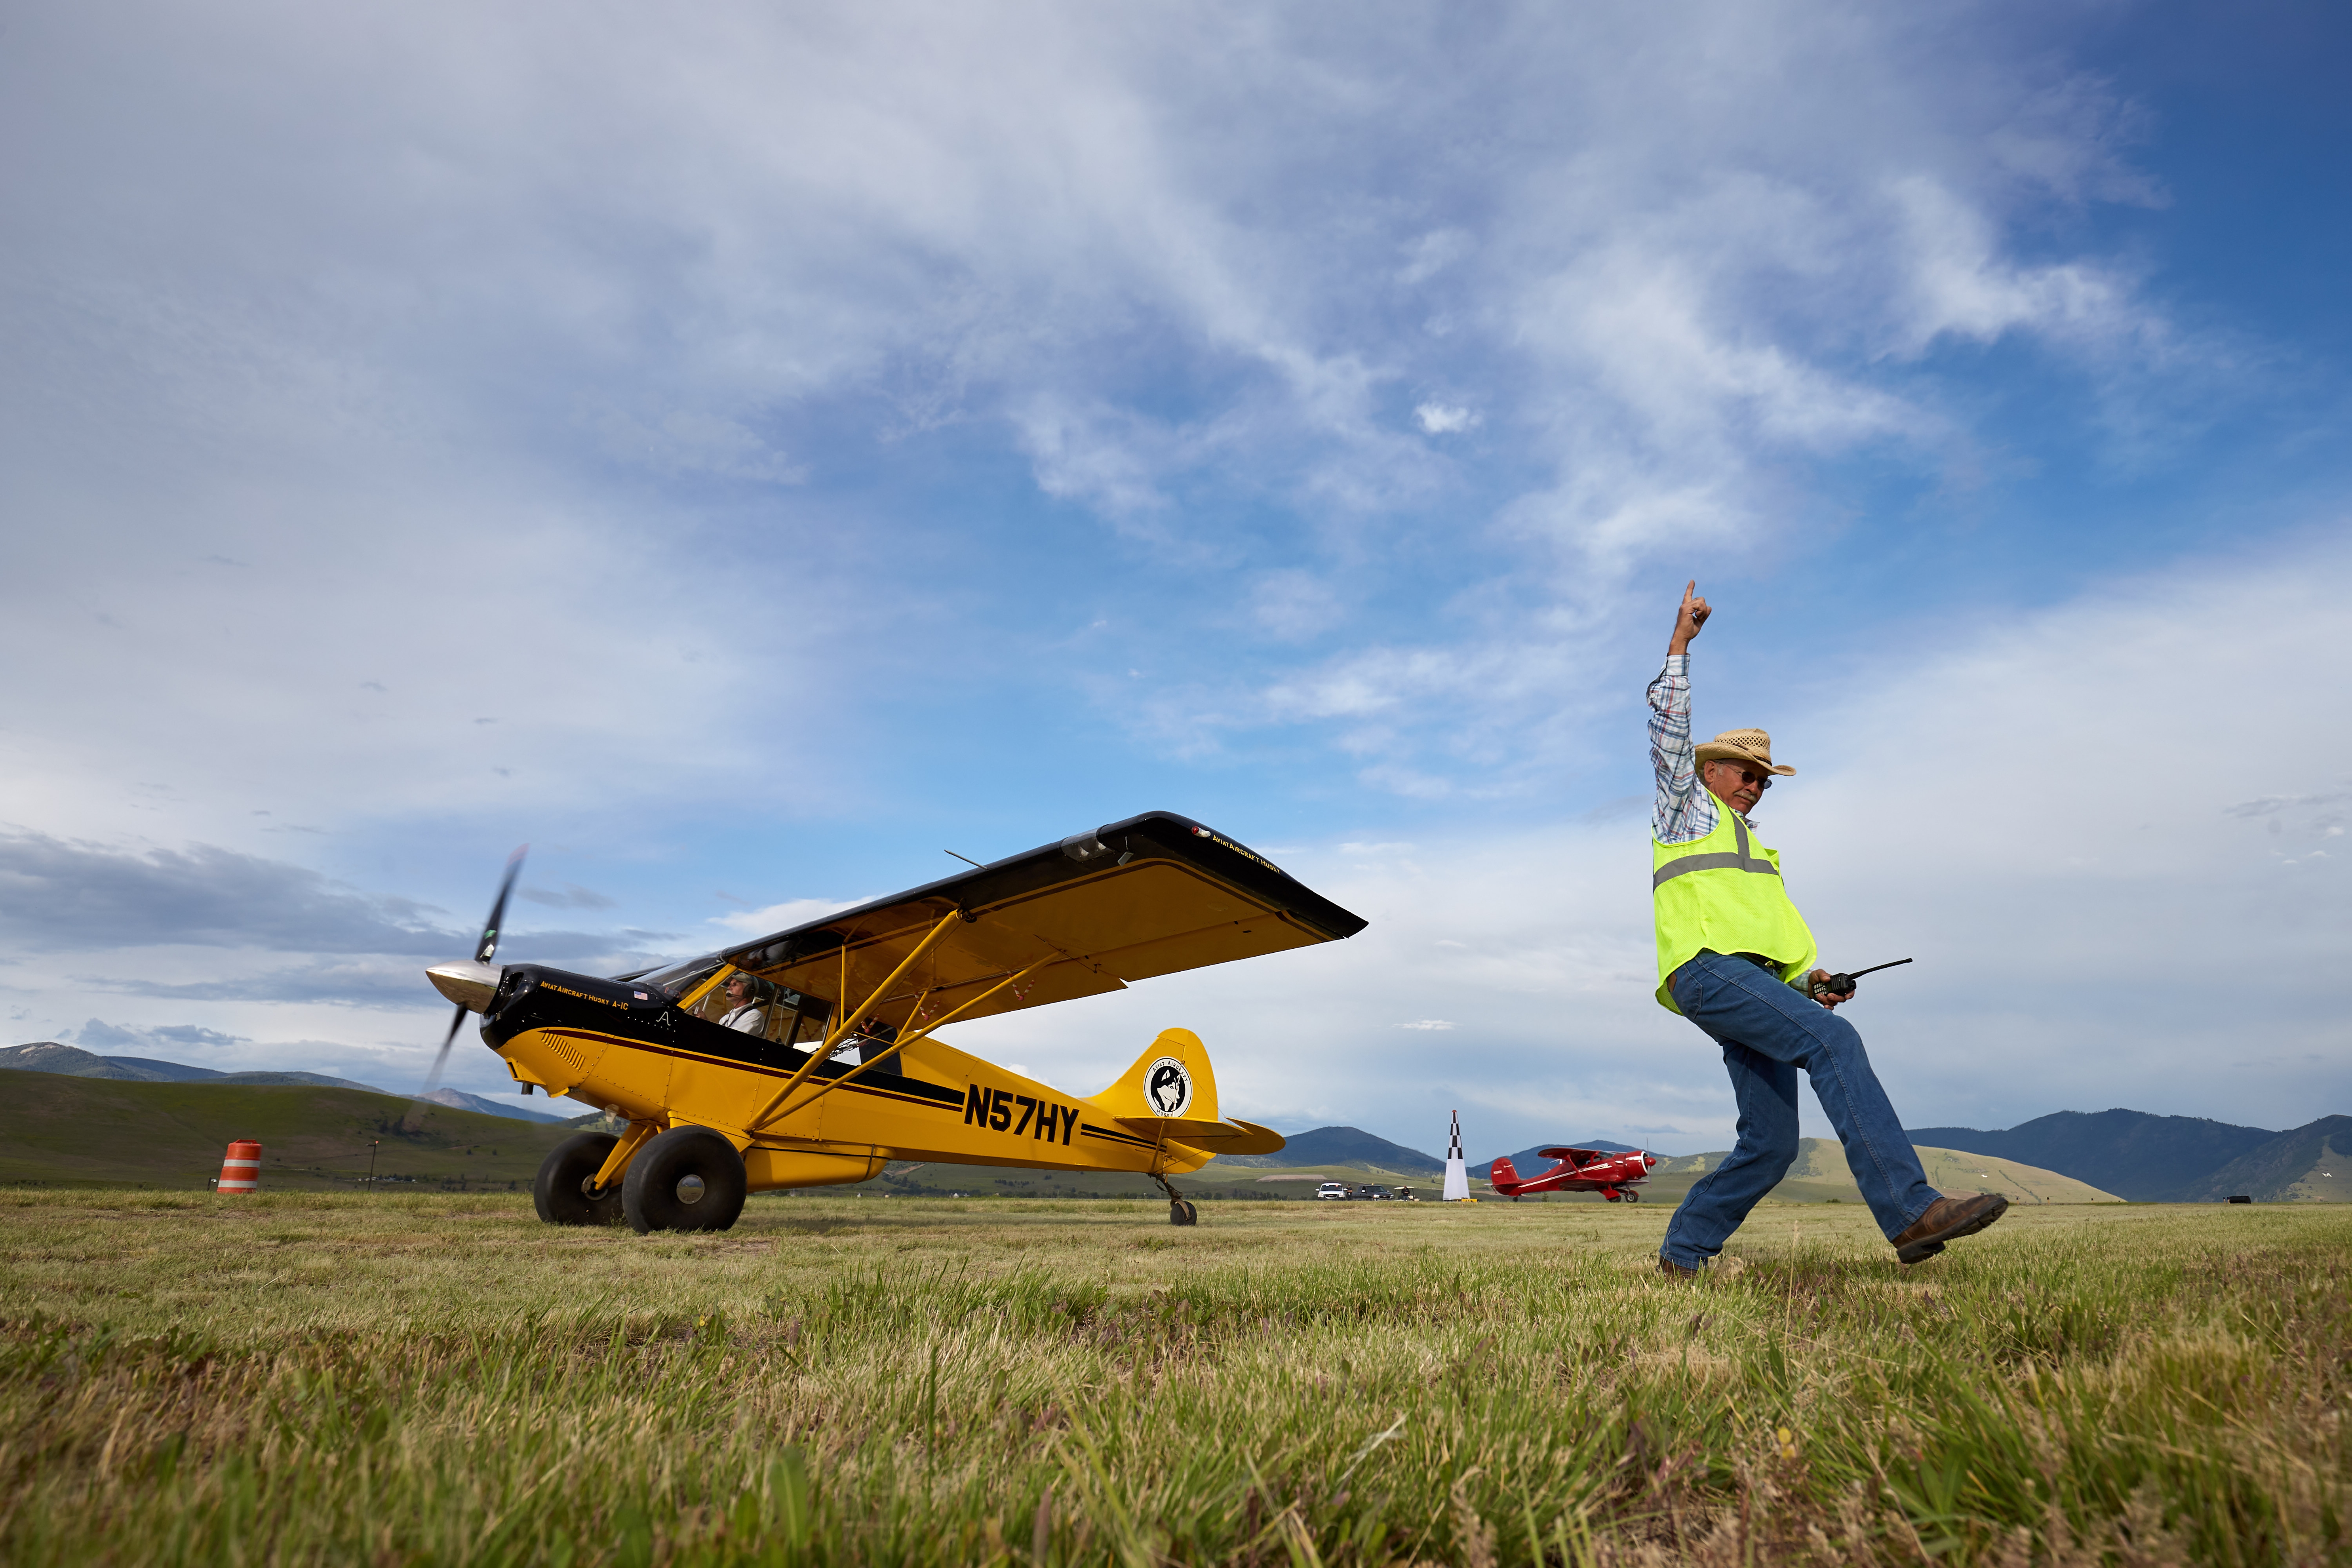 Texan Jimmie Gist, acting Aircraft Wrangler, orchestrates a STOL (Short Take Off and Landing) demonstration at the 2018 AOPA Fly In at Missoula.Missoula Airport (MSO)Missoula, MT